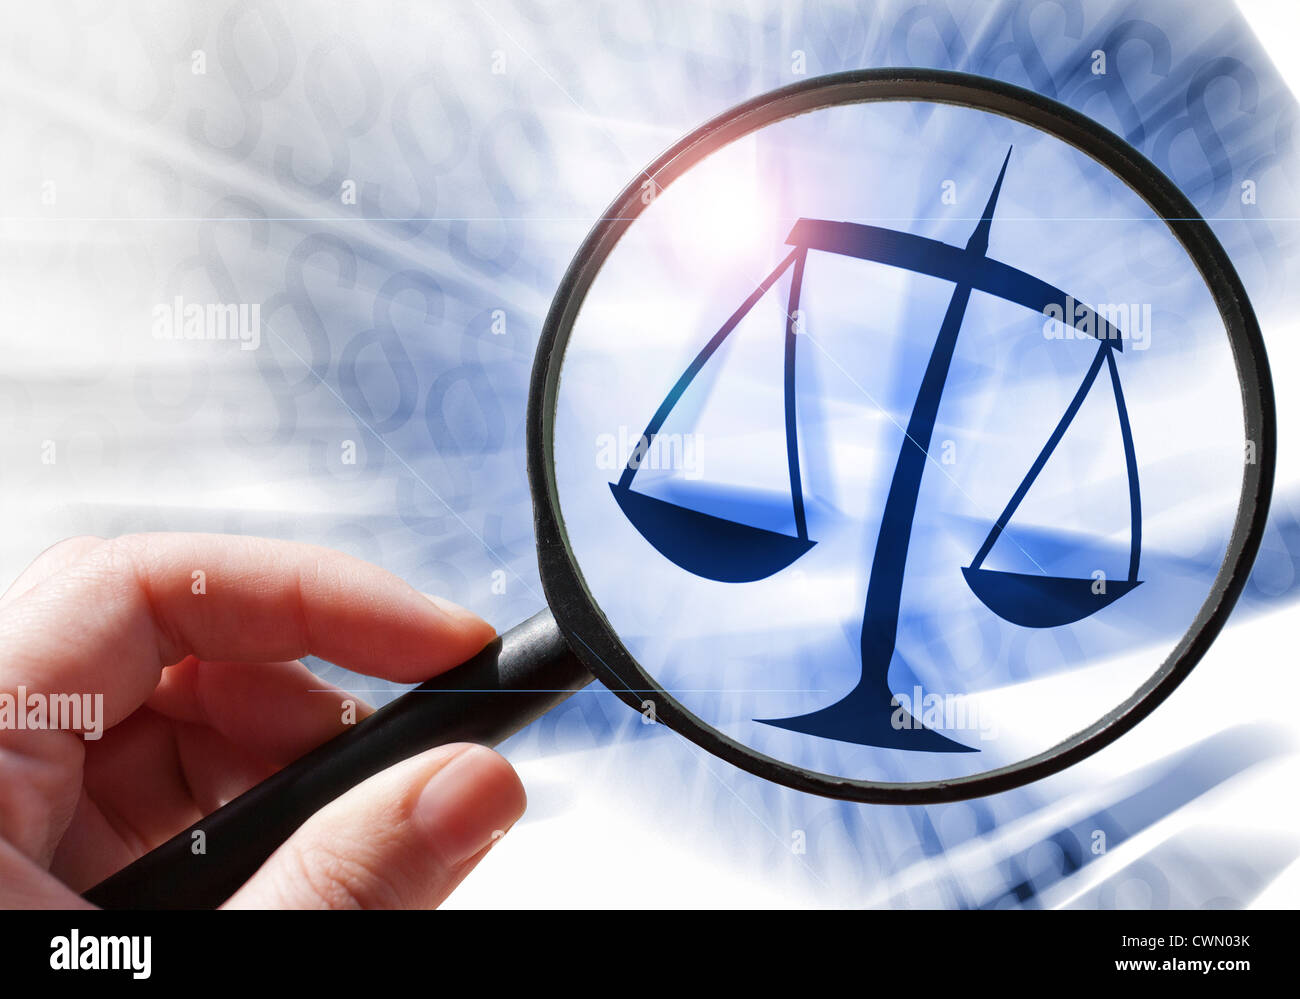 law and order - the scale of justice and paragraph sign Stock Photo